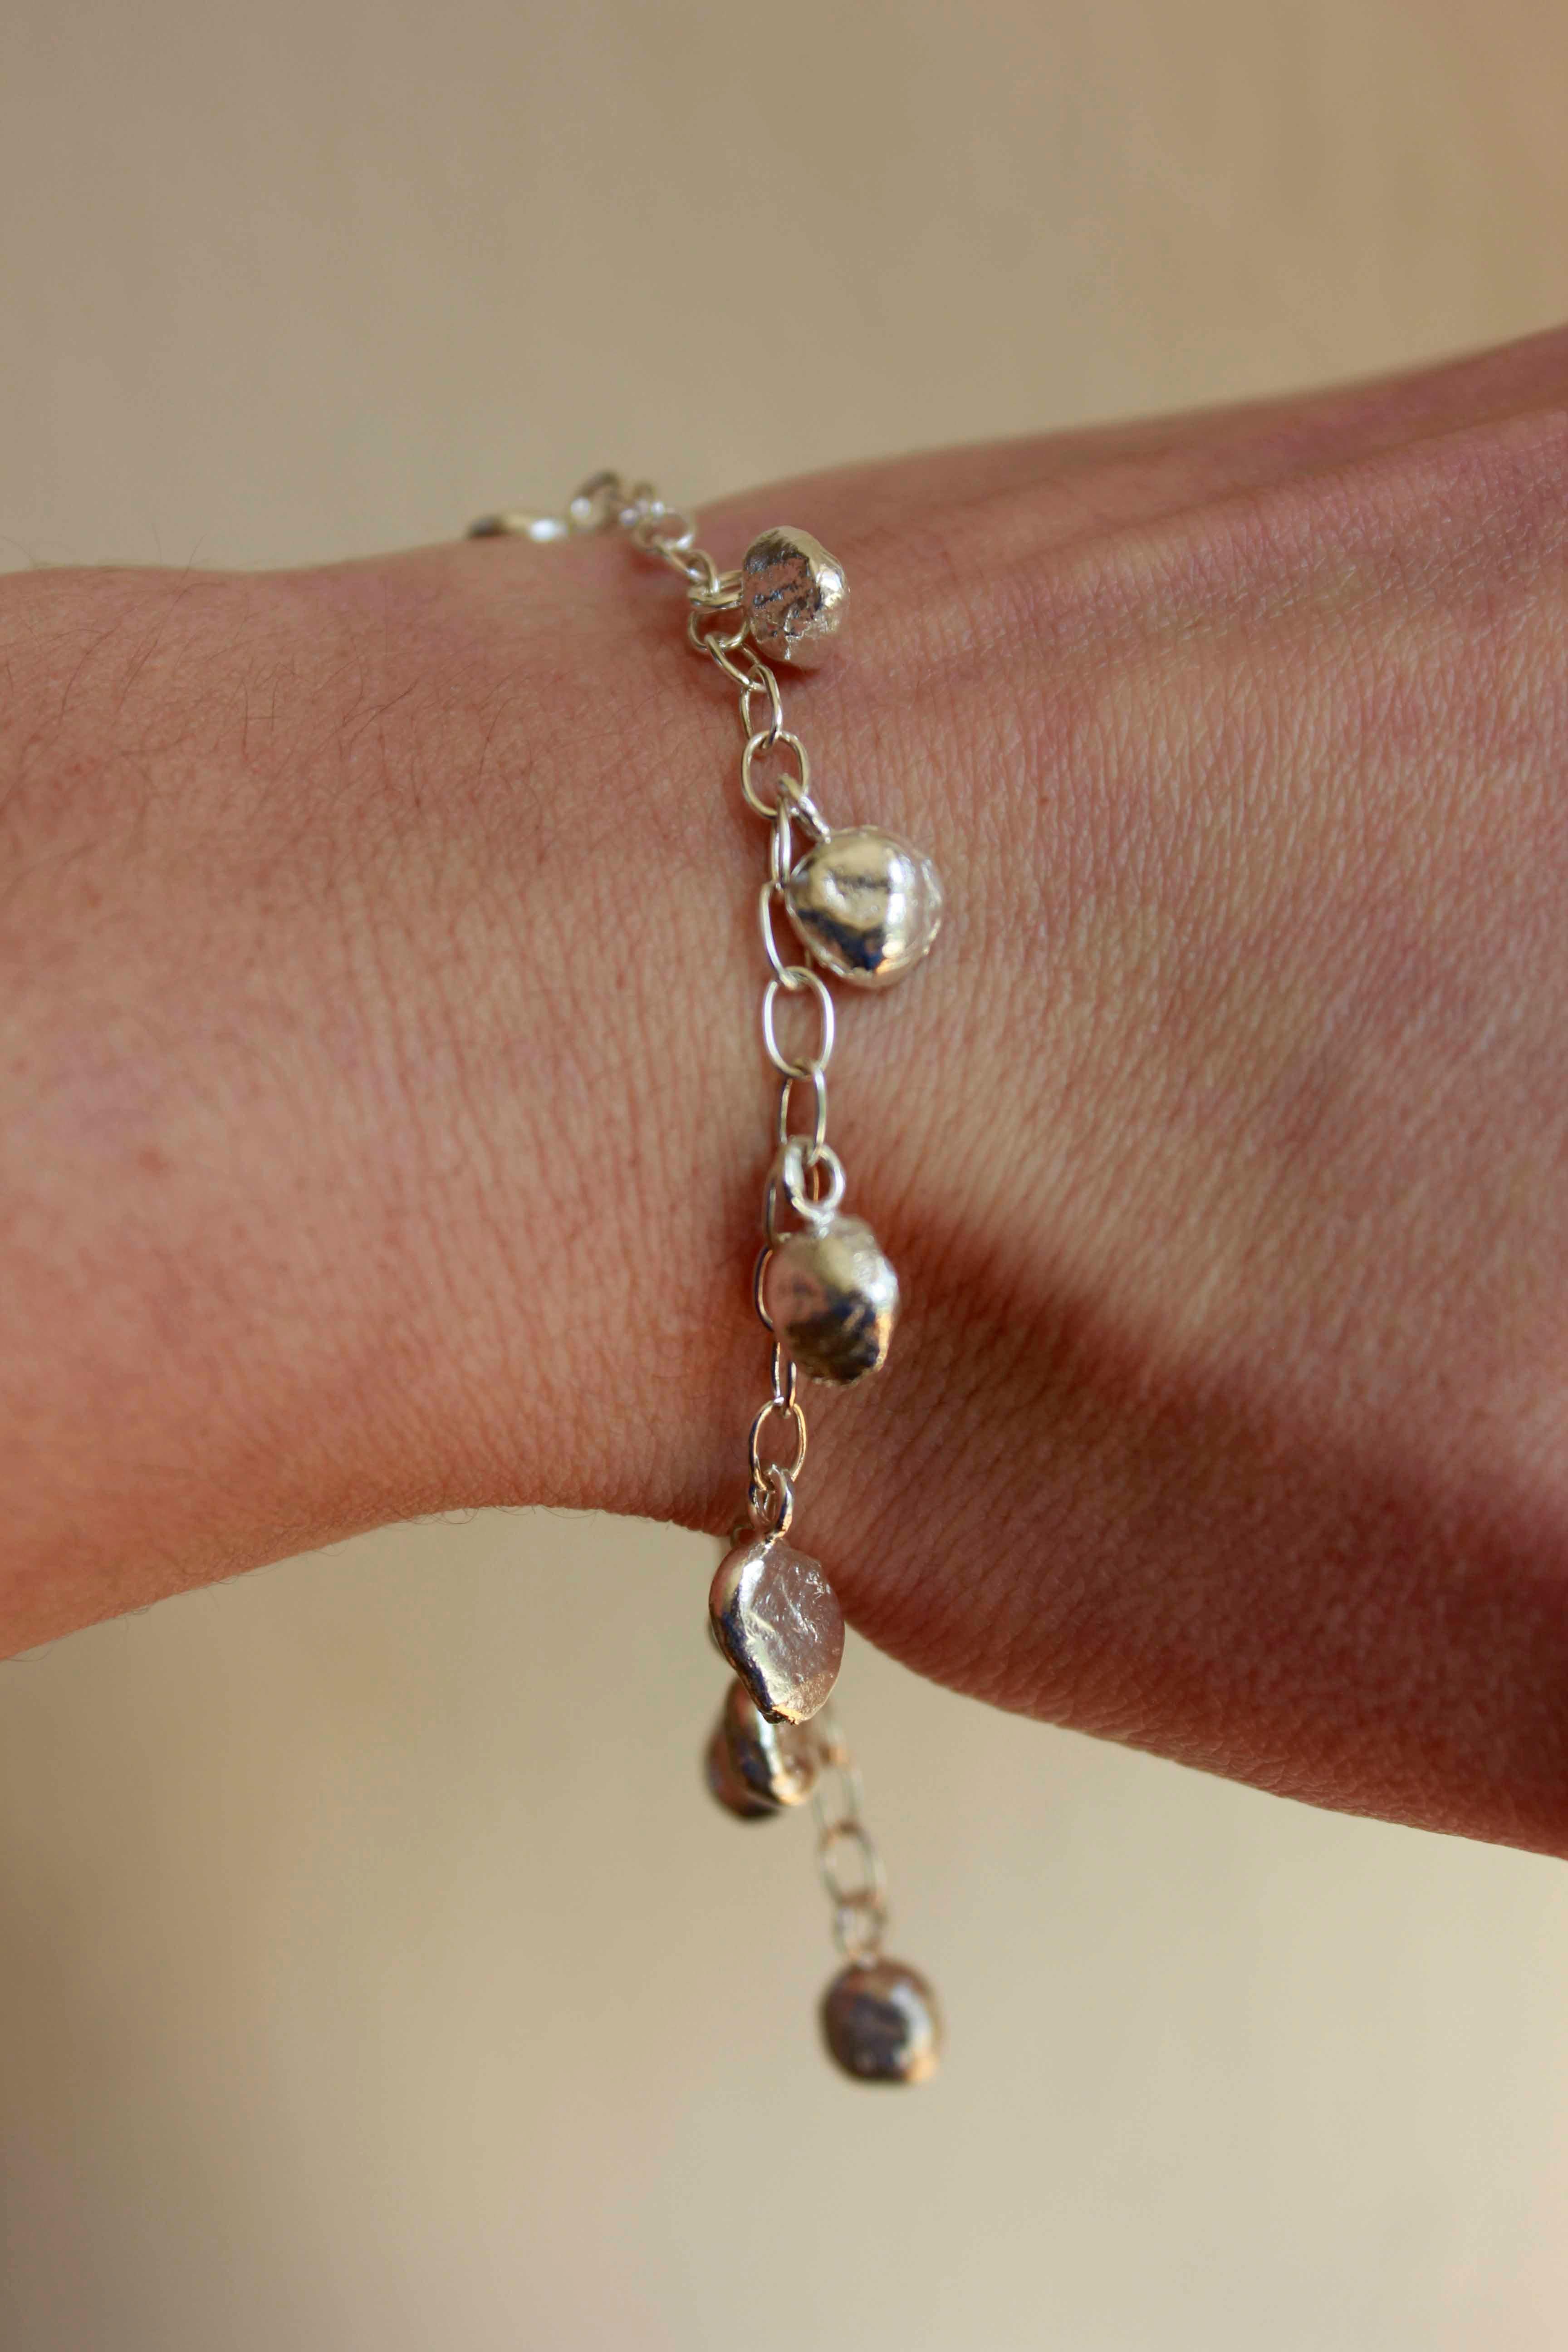 Hera Bracelet consists of 11 silver balls hanging from a silver chain.

The bracelet is adjustable, and the maximum length is 21cm.

The small organic balls are made from our silver scrap, which means they are 100% recycled and solid.

Each ball has